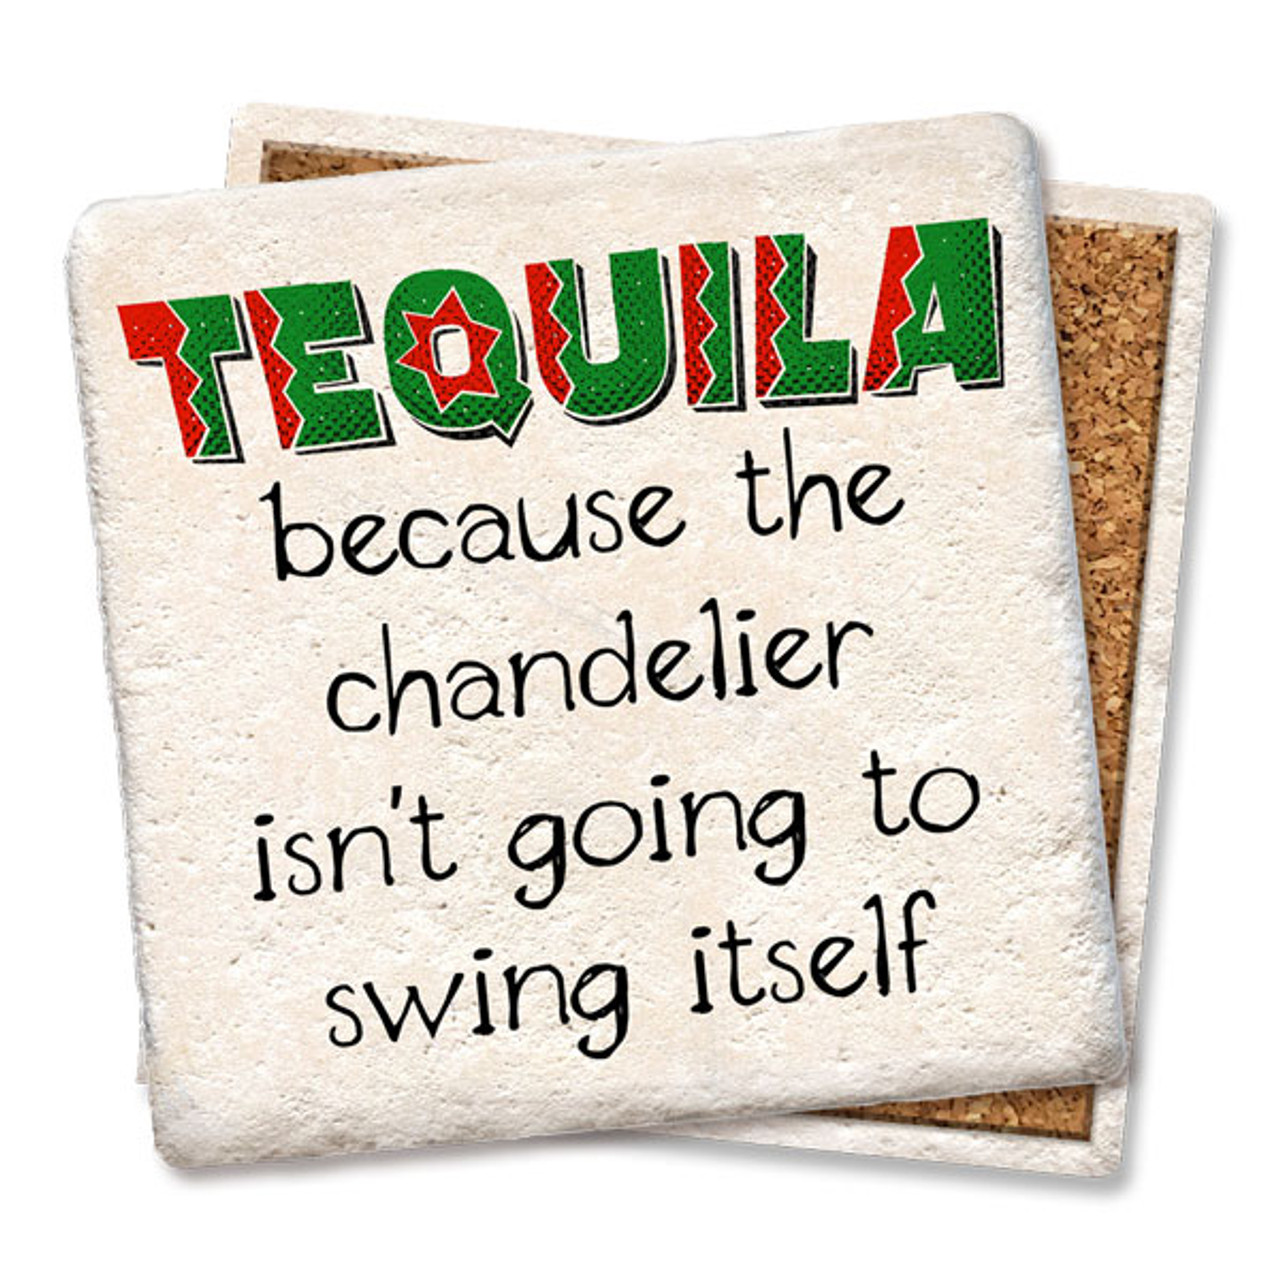 Tequila Chandelier Swing Itself Coaster - Tipsy Coasters & Gifts